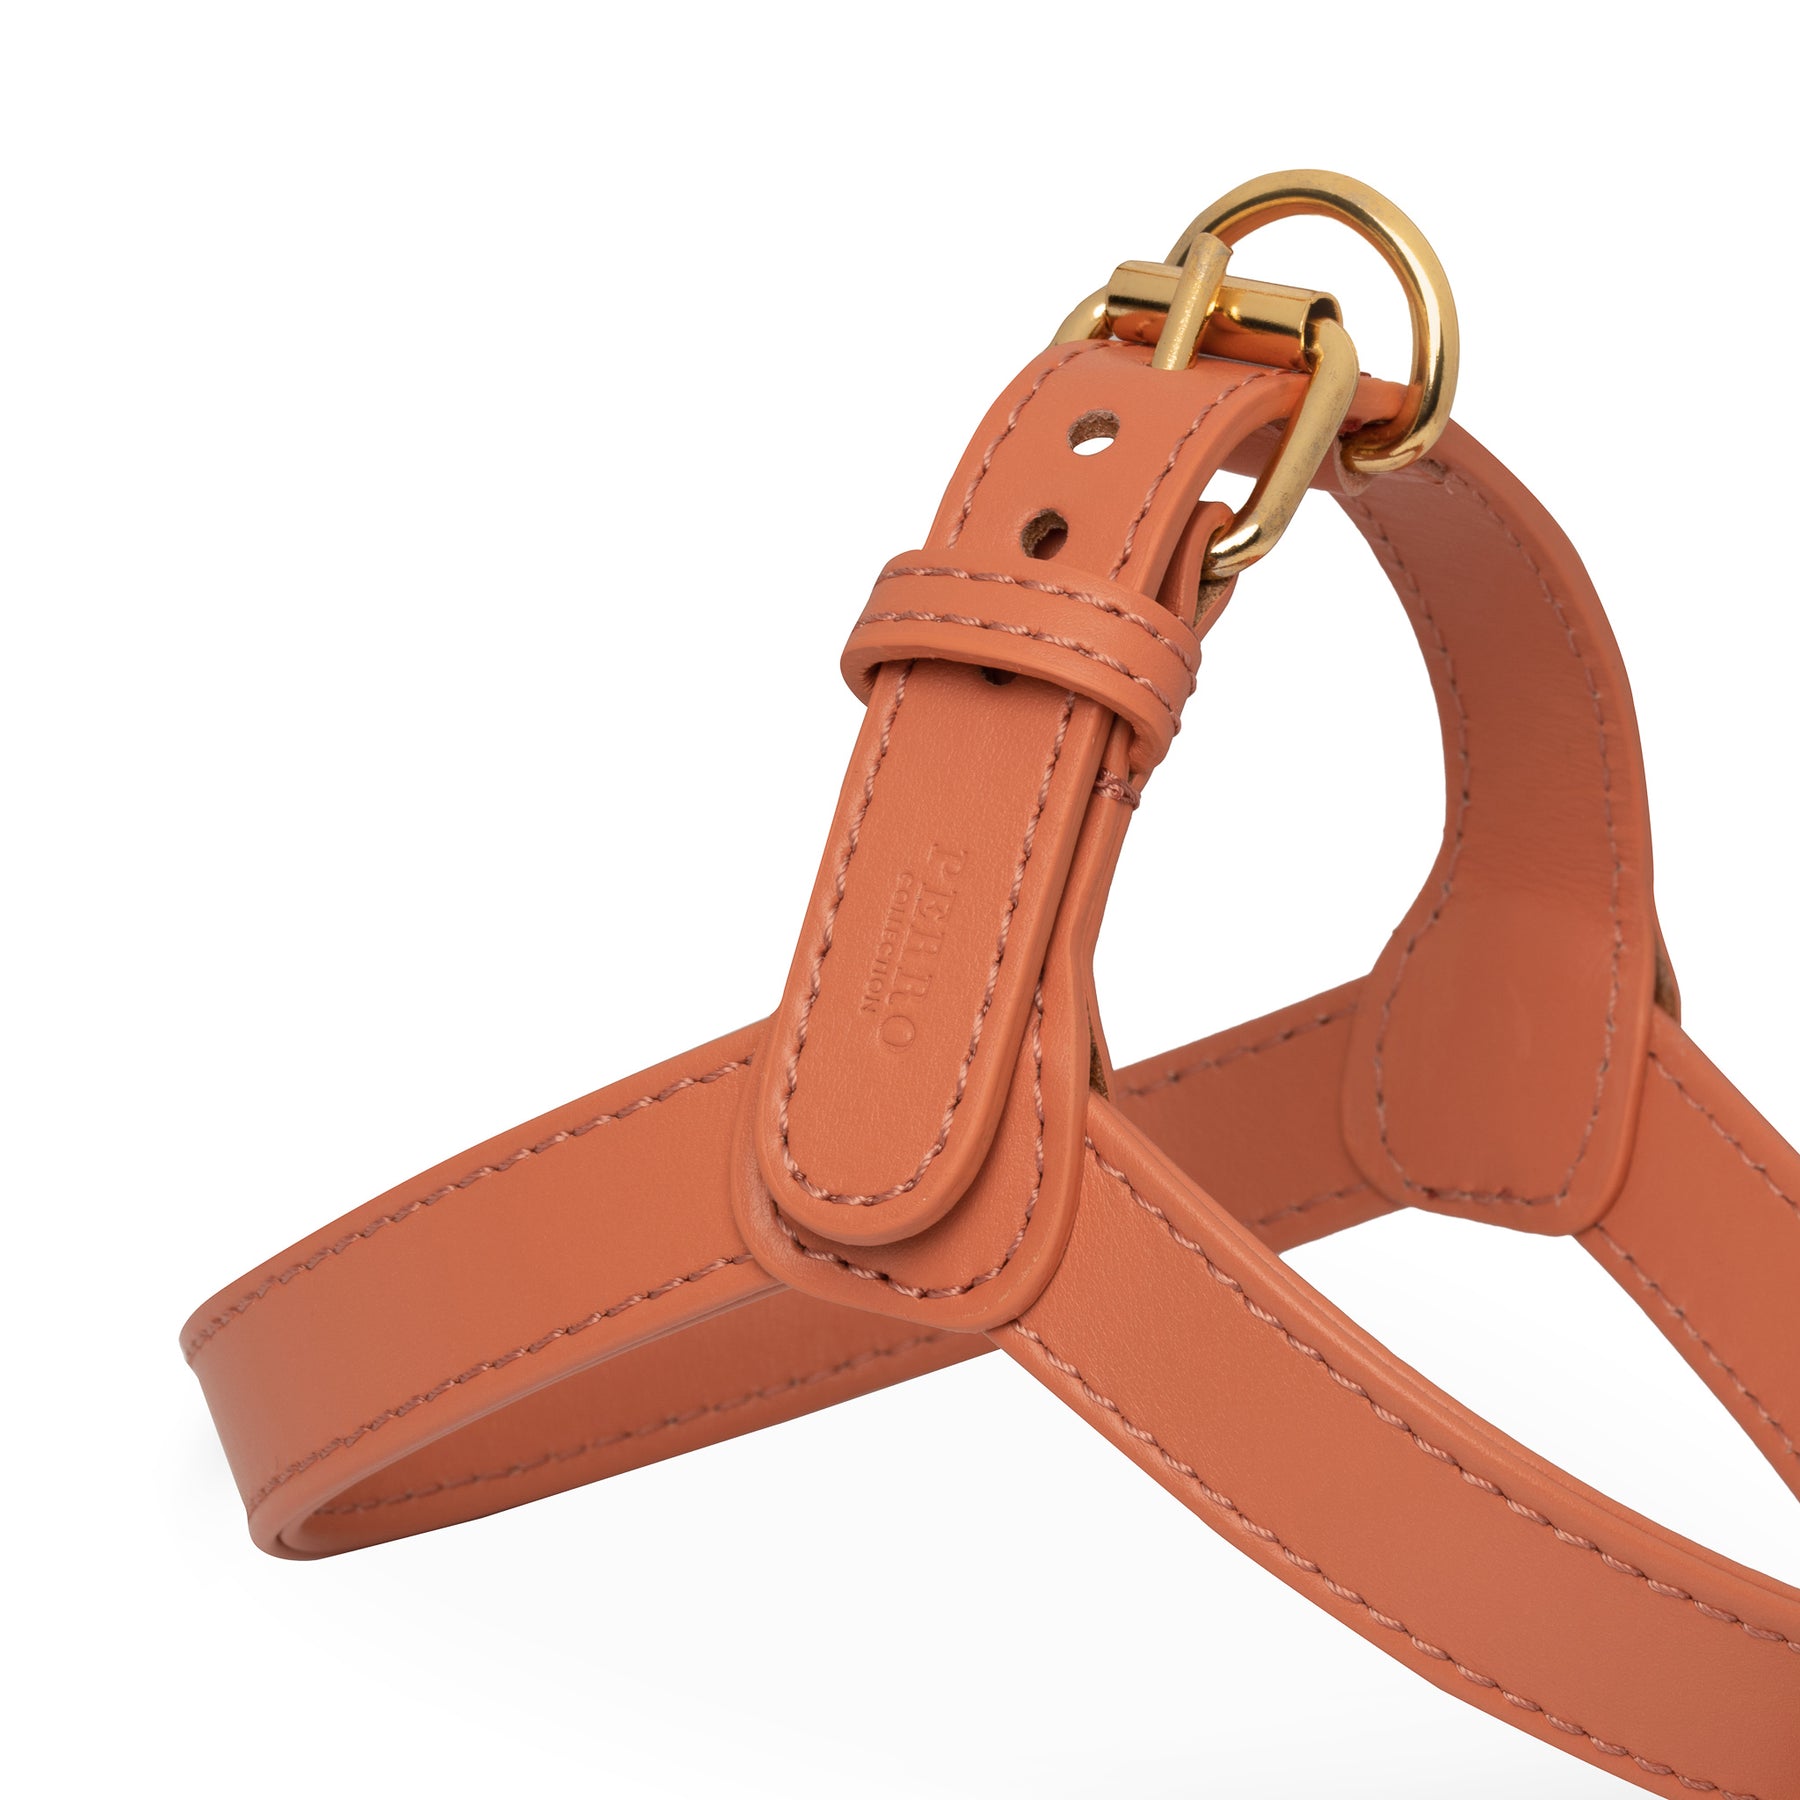 Vachetta Leather or Brown Shoulder Strap for Your Bags -  Australia